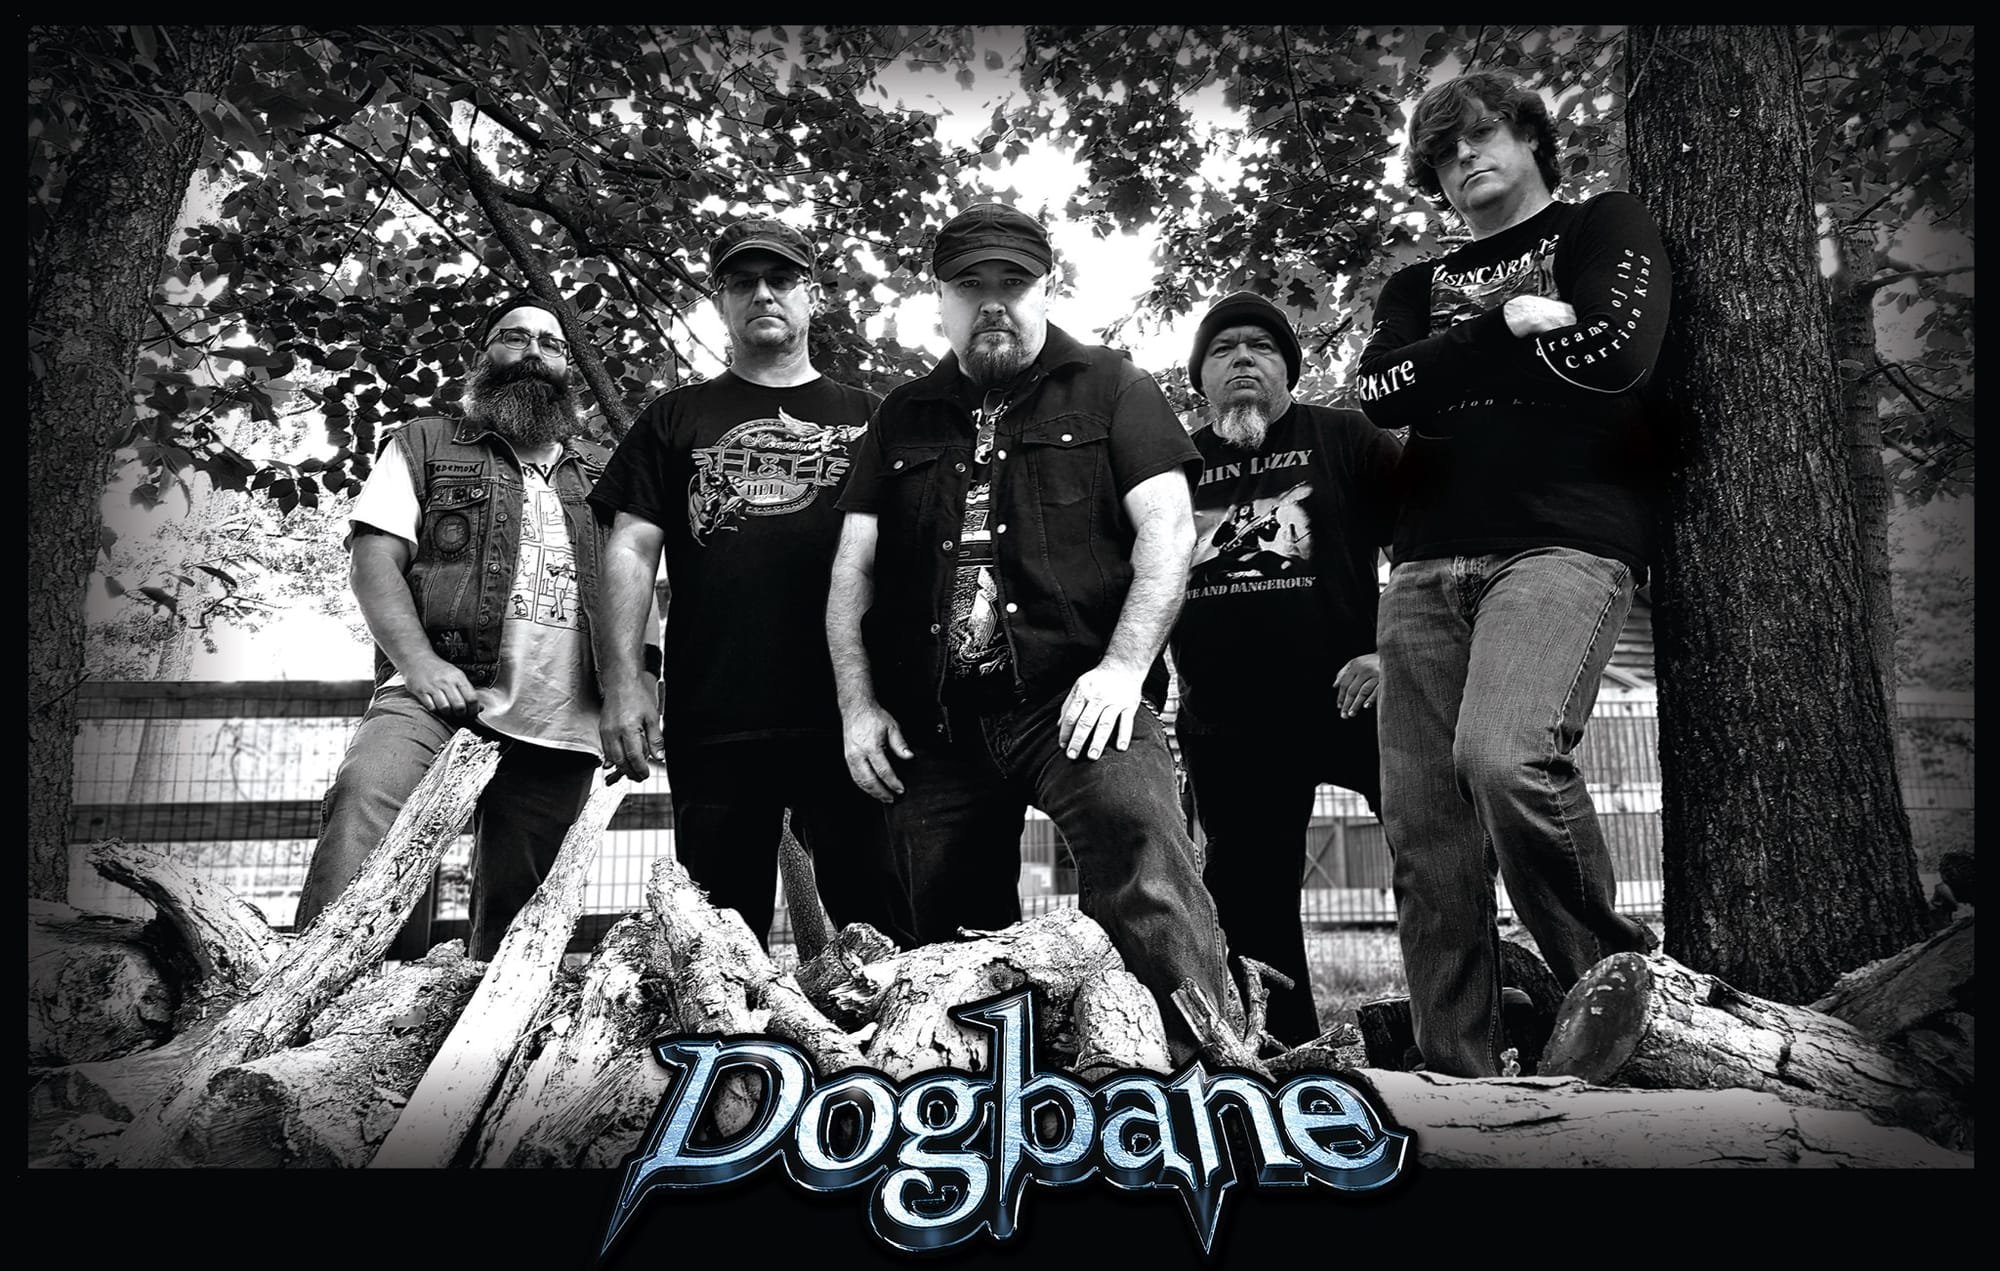 Interview with DOGBANE